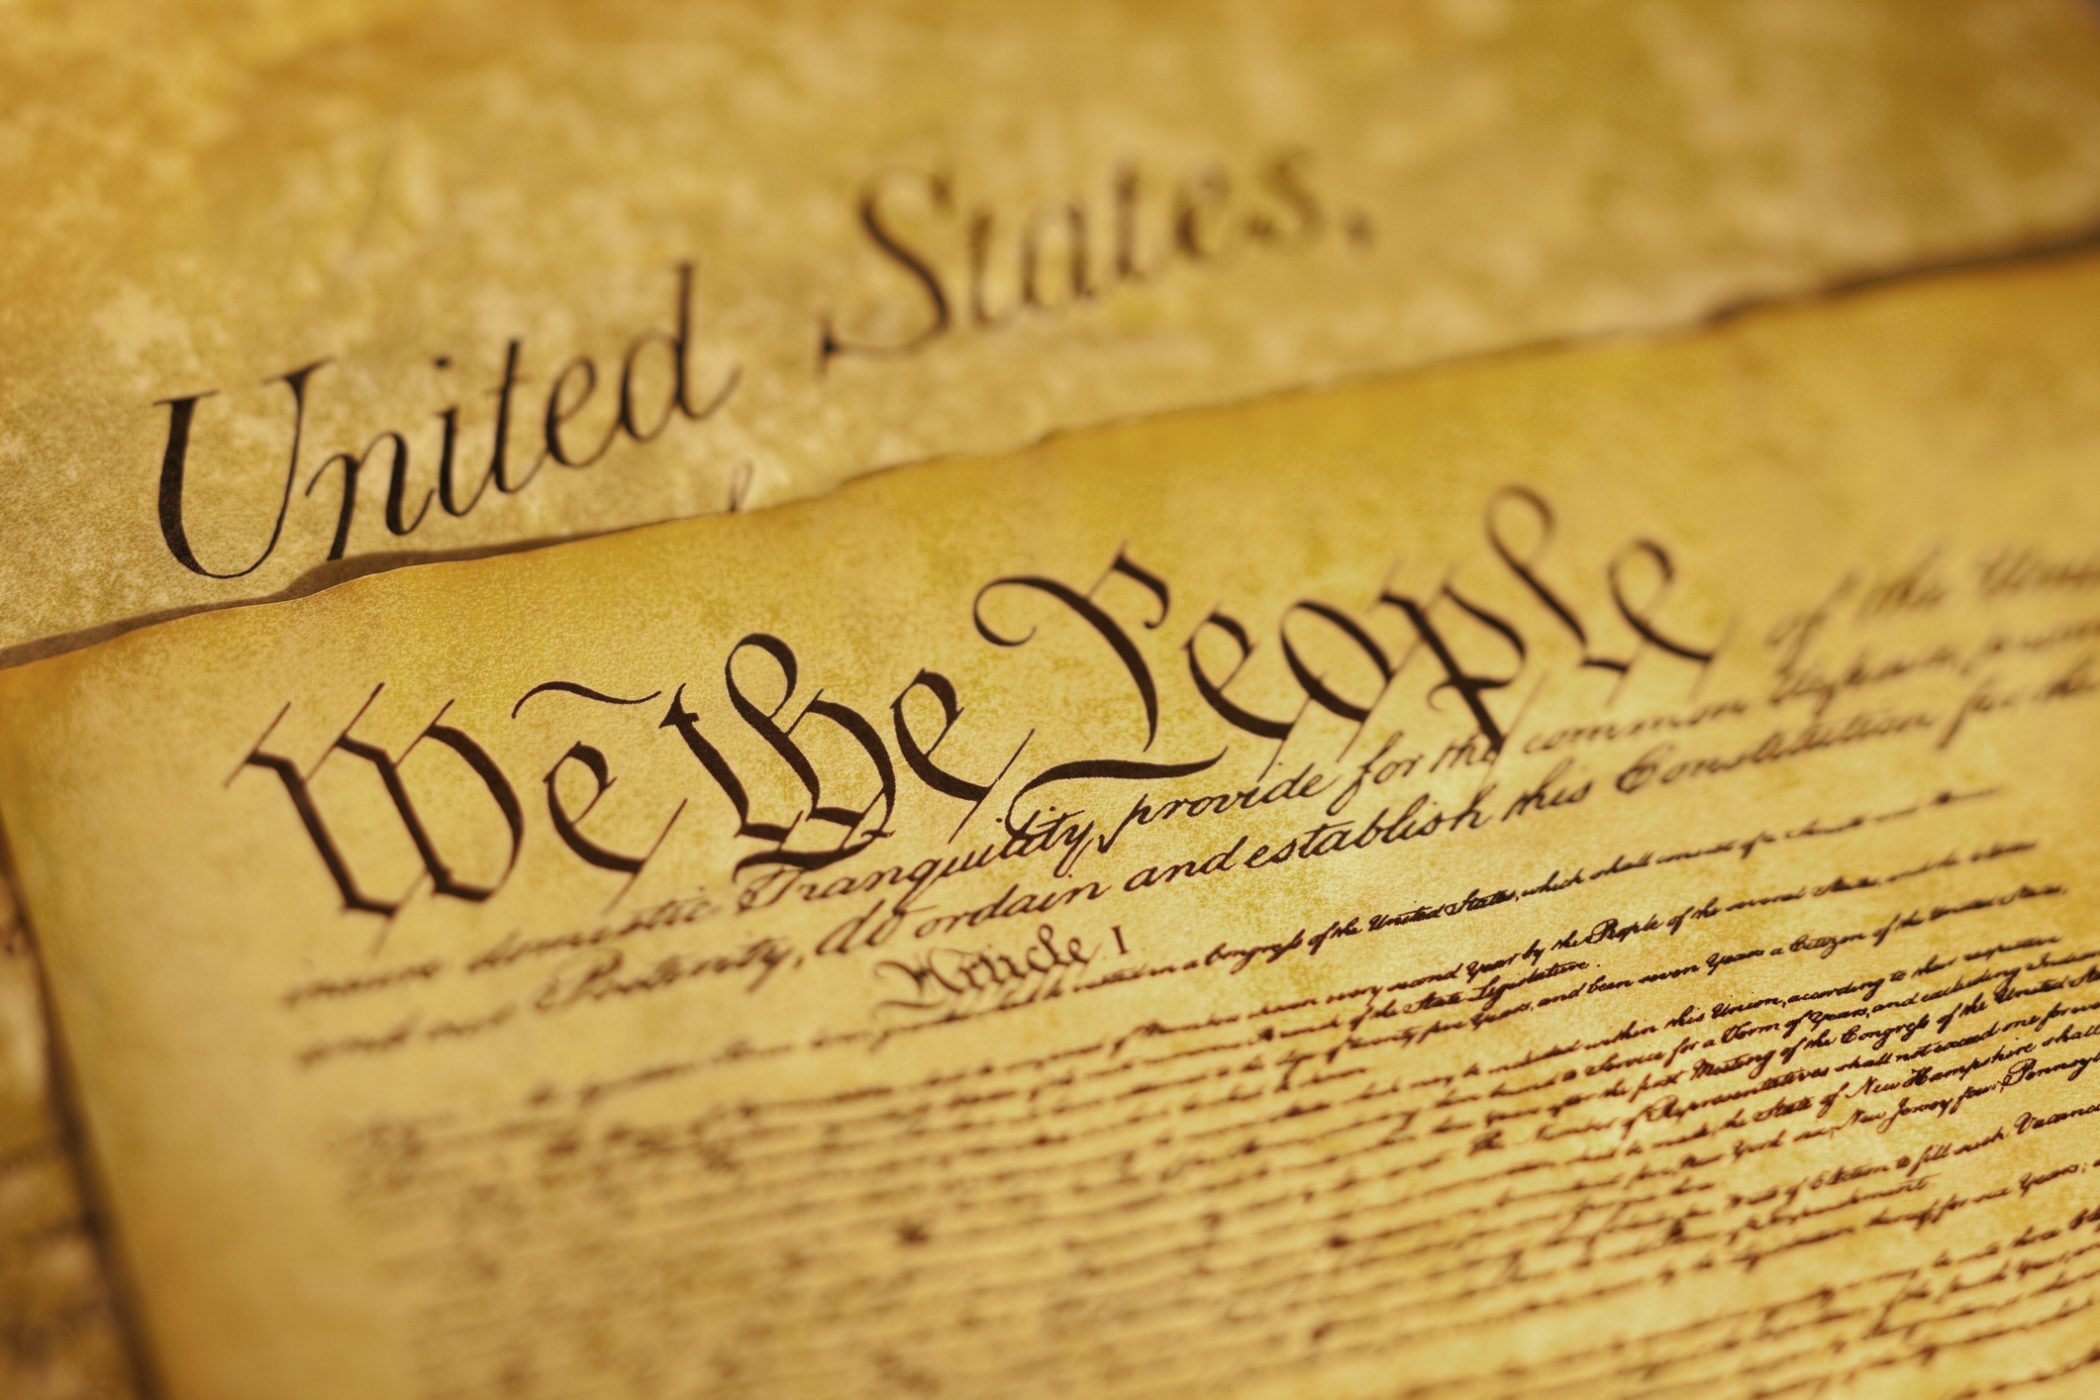 Supremacy Clause of the Constitution